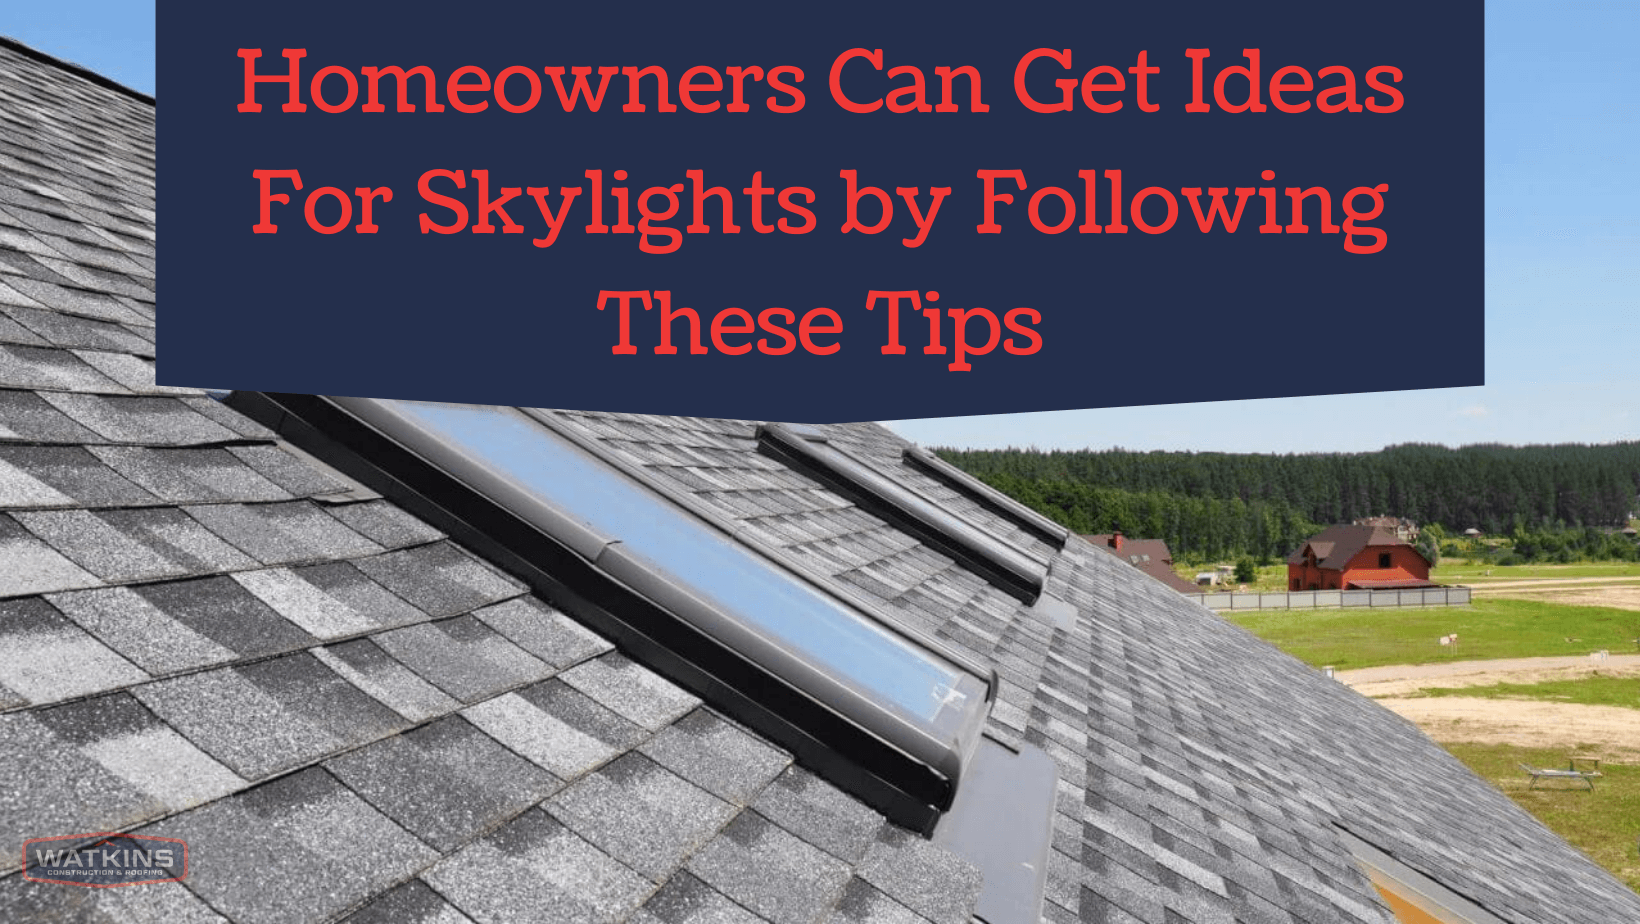 Homeowners-can-get-ideas-for-skylights-by-following-these-tips.